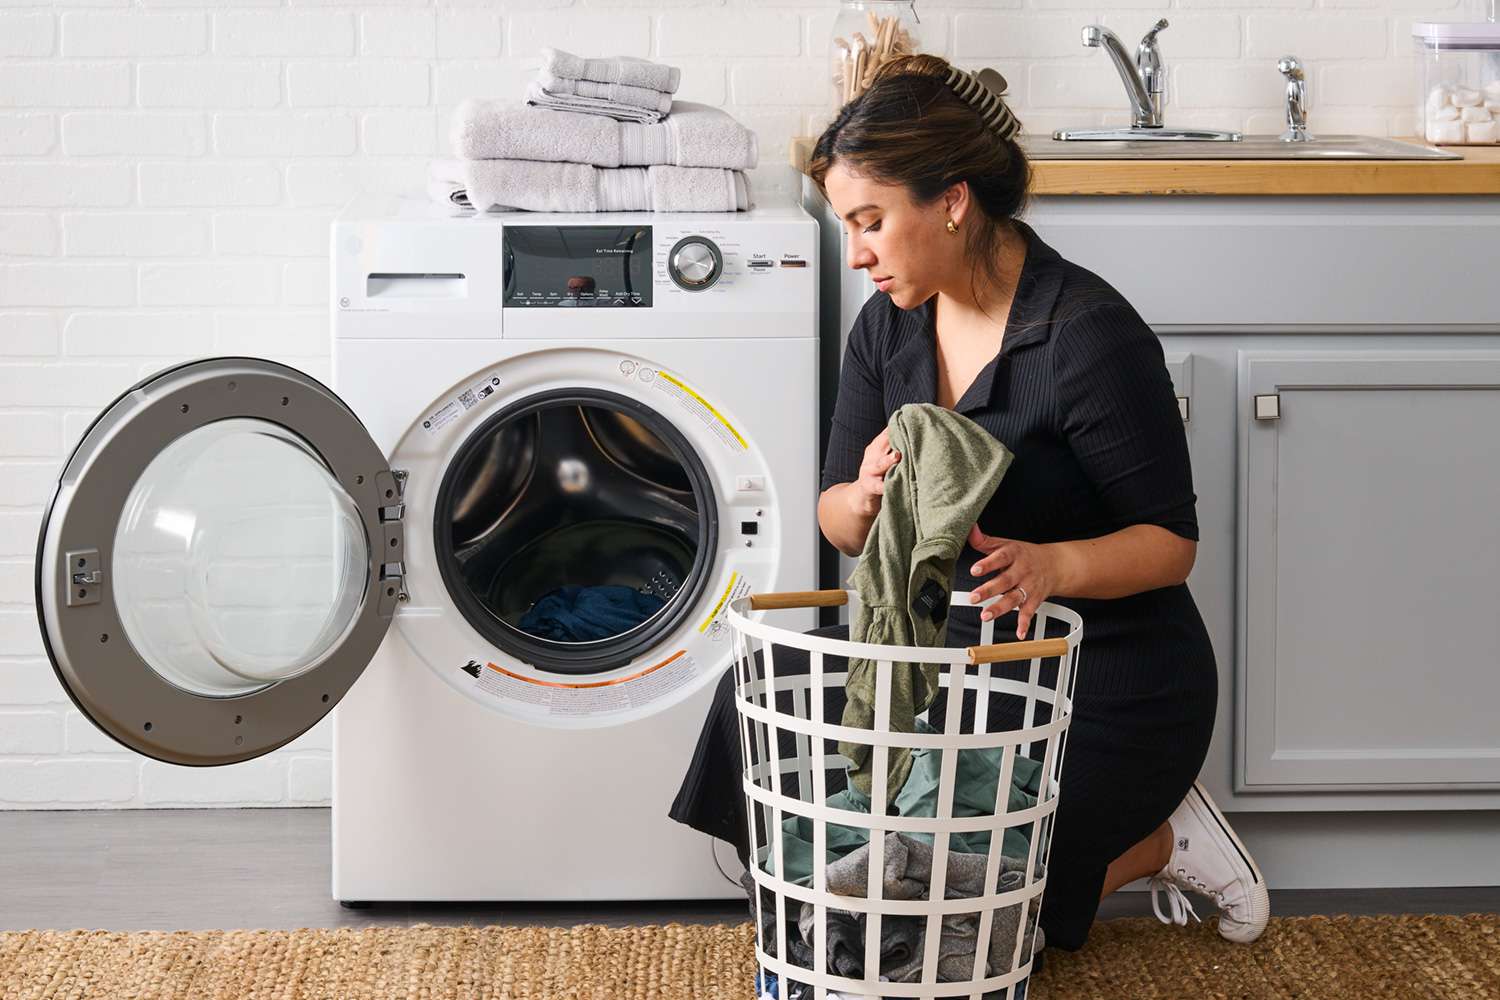 All-in-One Washing Machine: Simplifying Your Laundry Routine